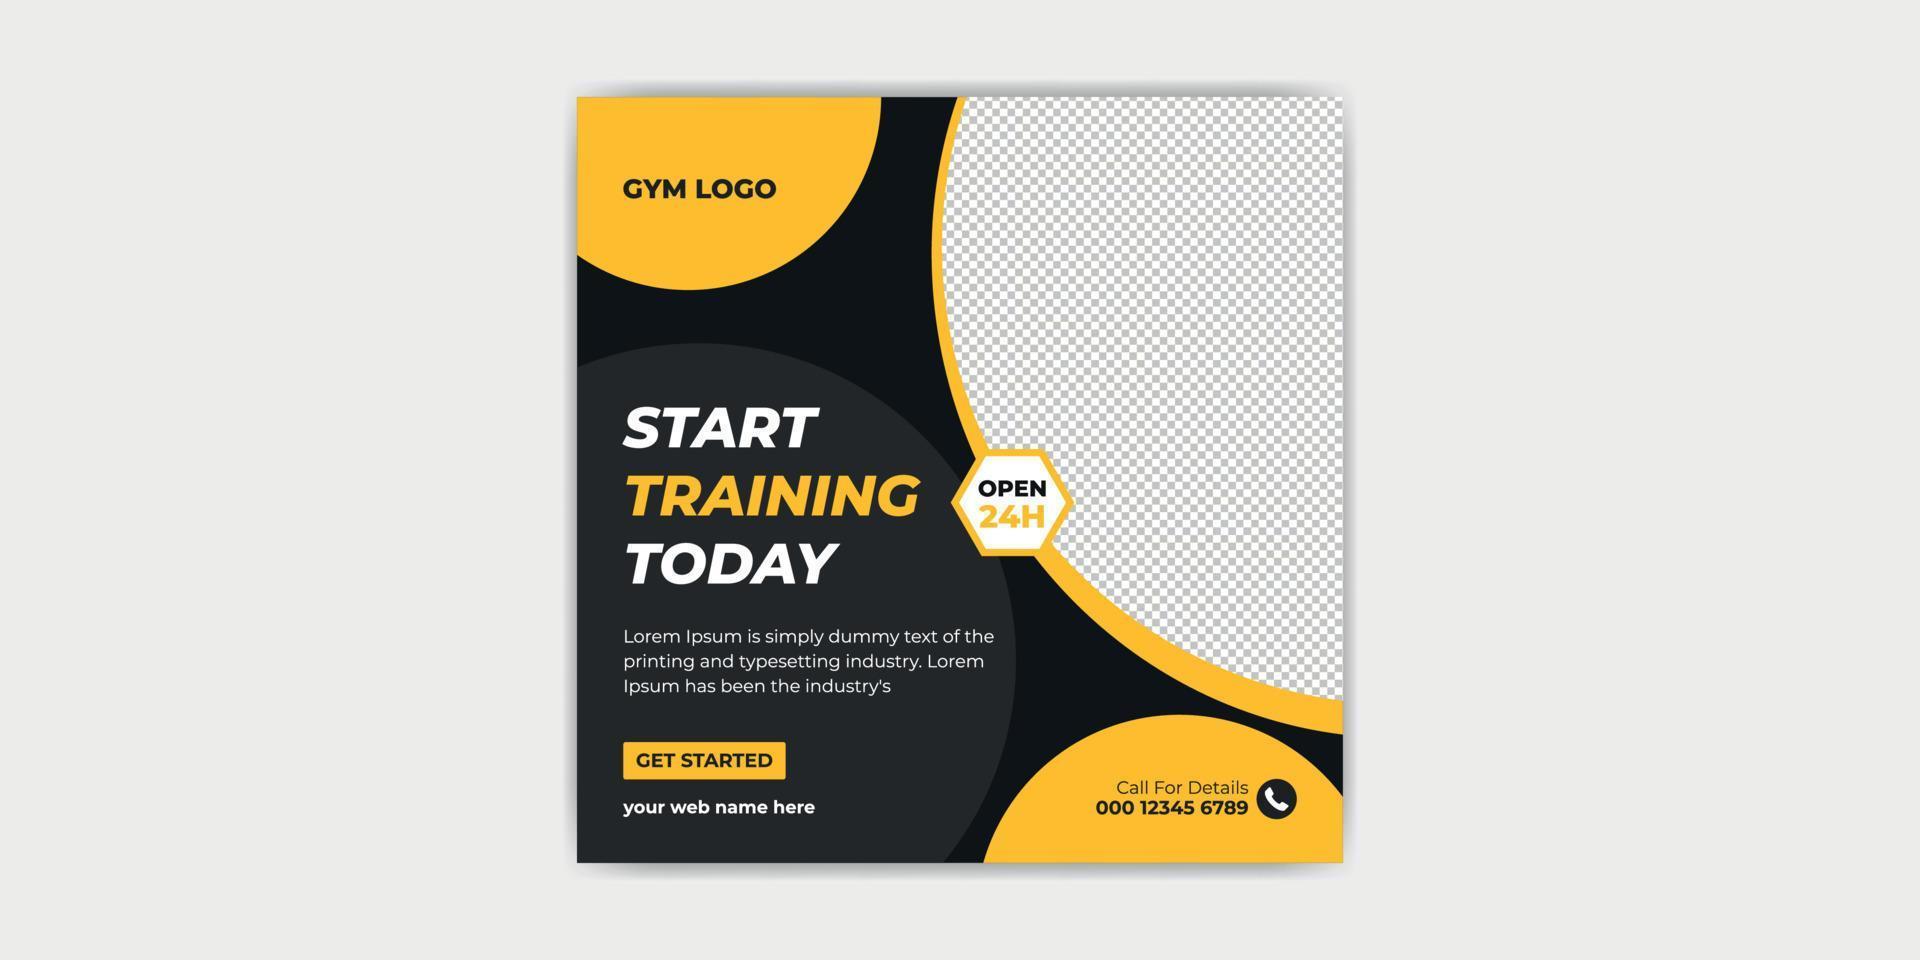 Fitness Gym Social Media Post and Web Banner Design vector